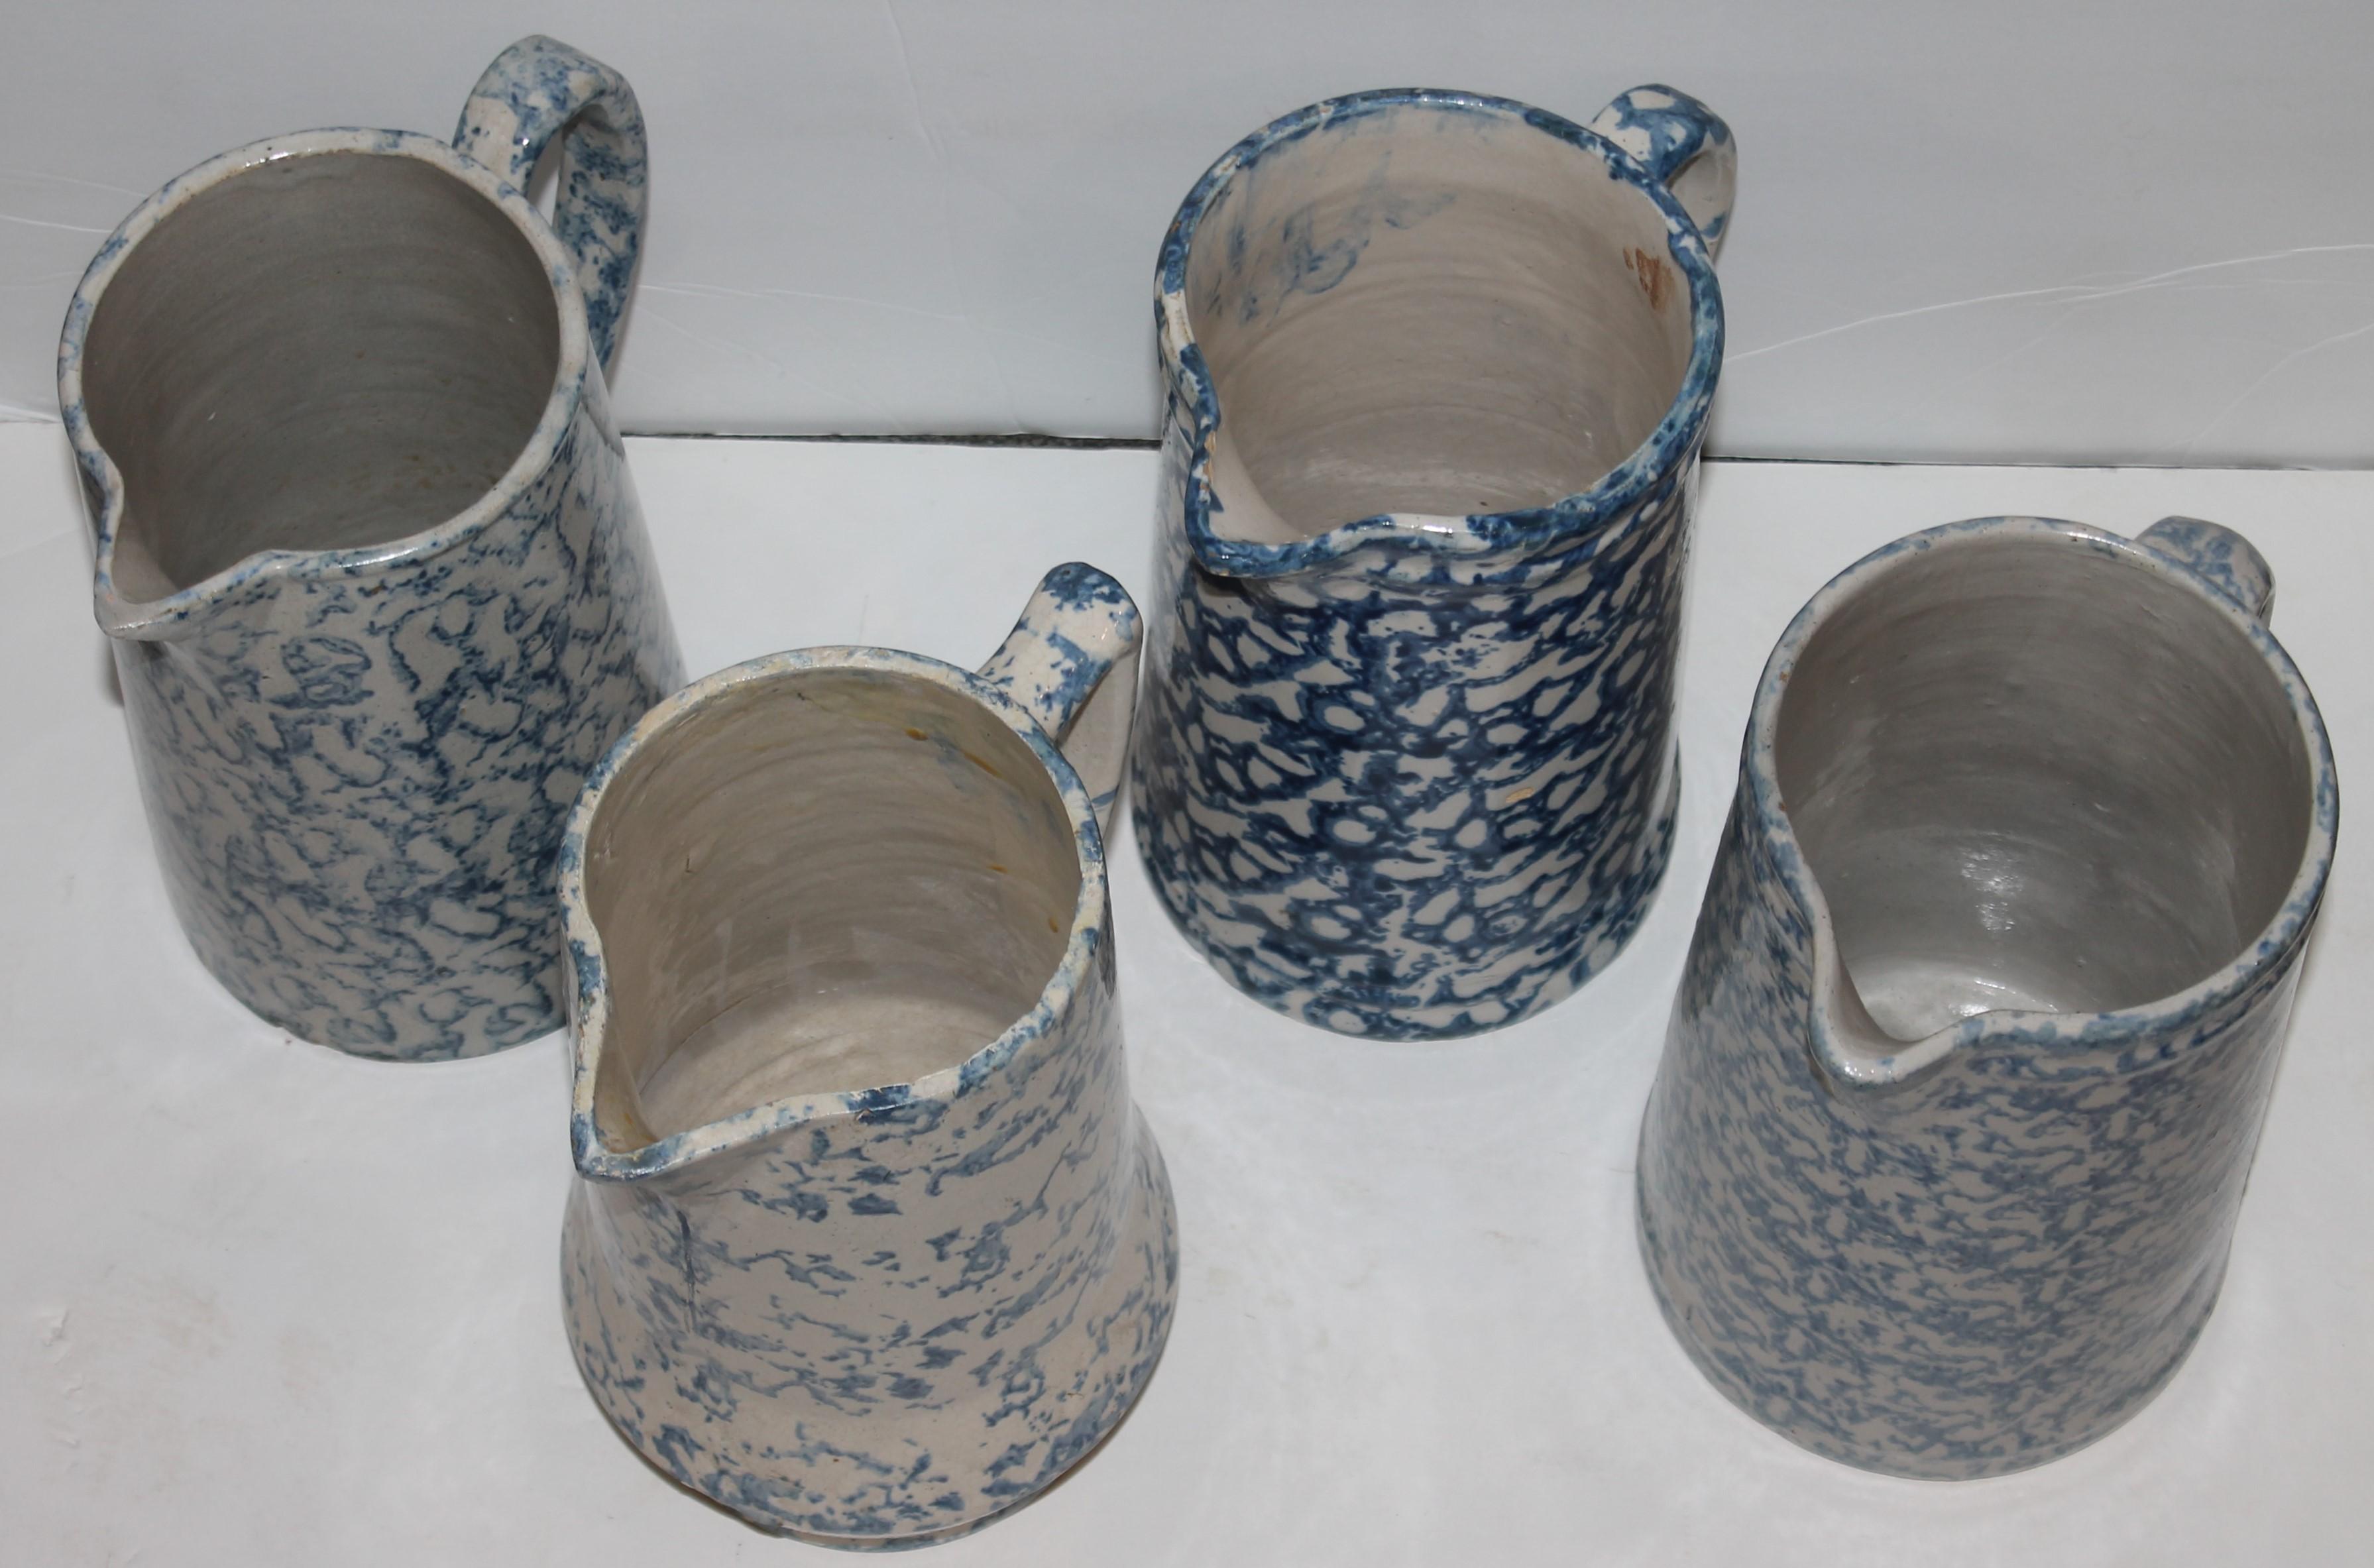 Country Collection of 19th Century Sponge Ware Pottery Pitchers-4